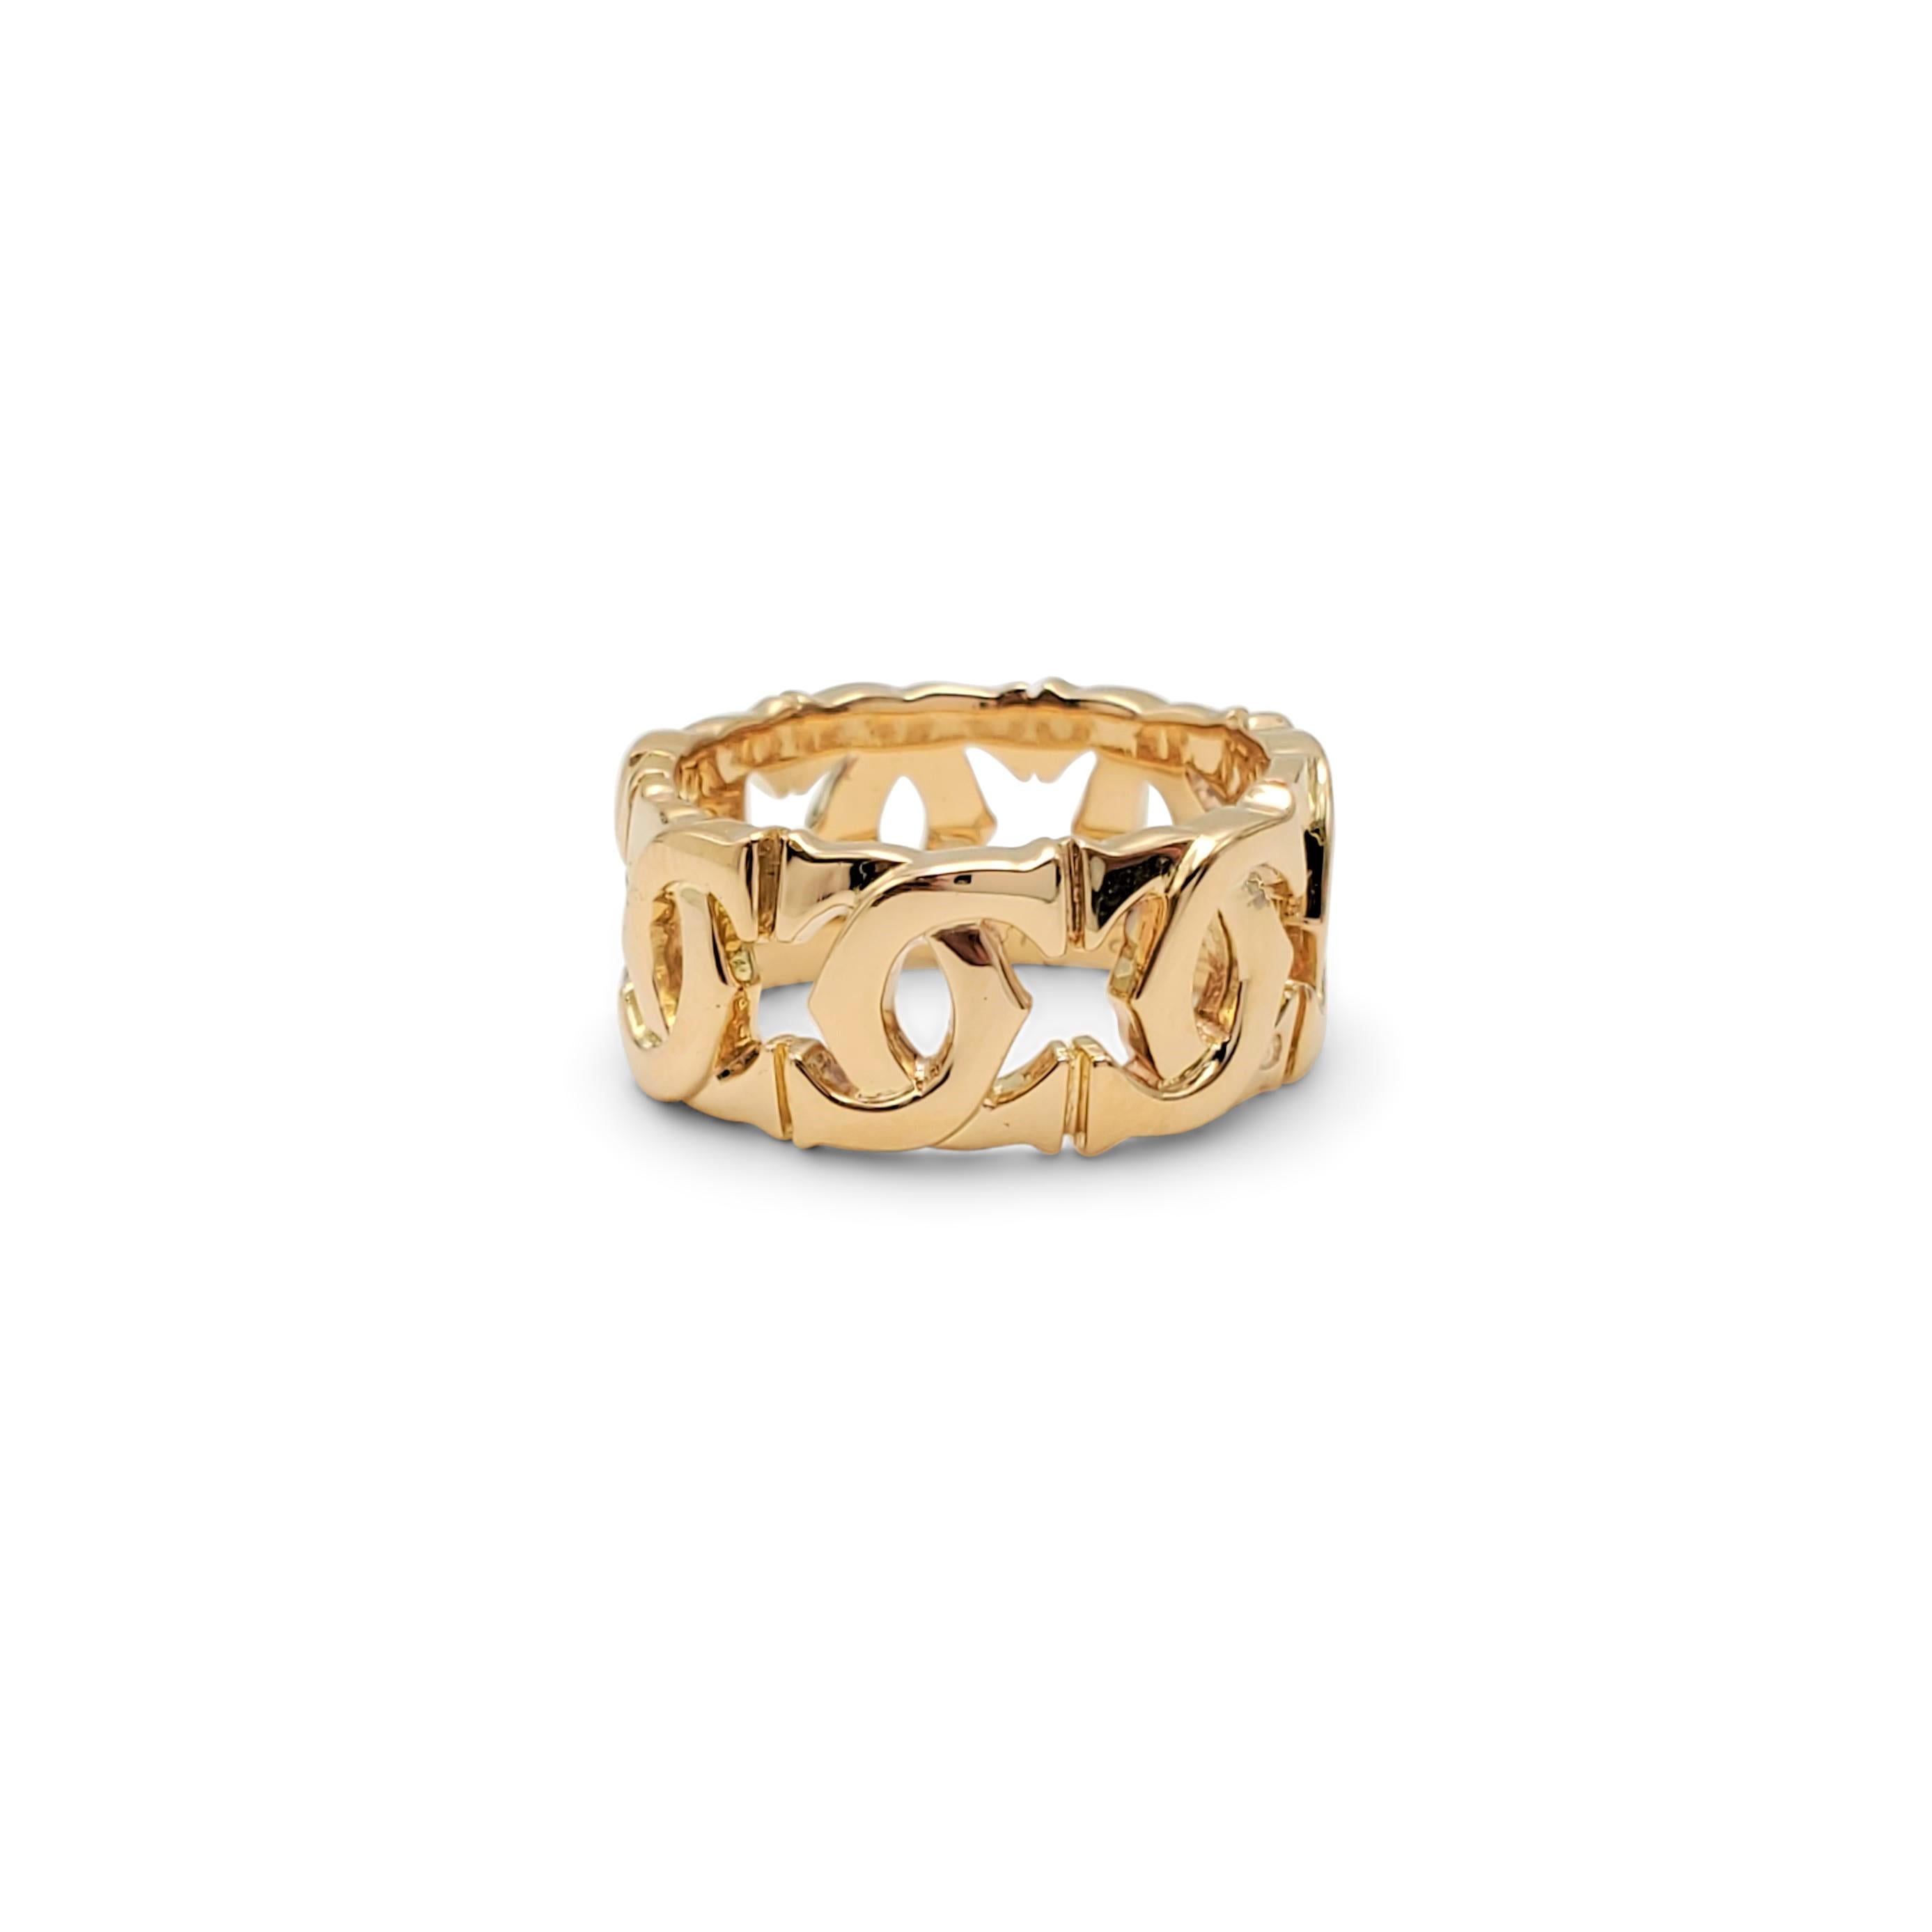 Authentic Cartier 'Penelope' ring crafted in 18 karat yellow gold is comprised of interlocking Cartier double-C motifs. Signed Cartier, 750, with serial number. Ring size 5. The ring is not presented with the original box or papers. CIRCA